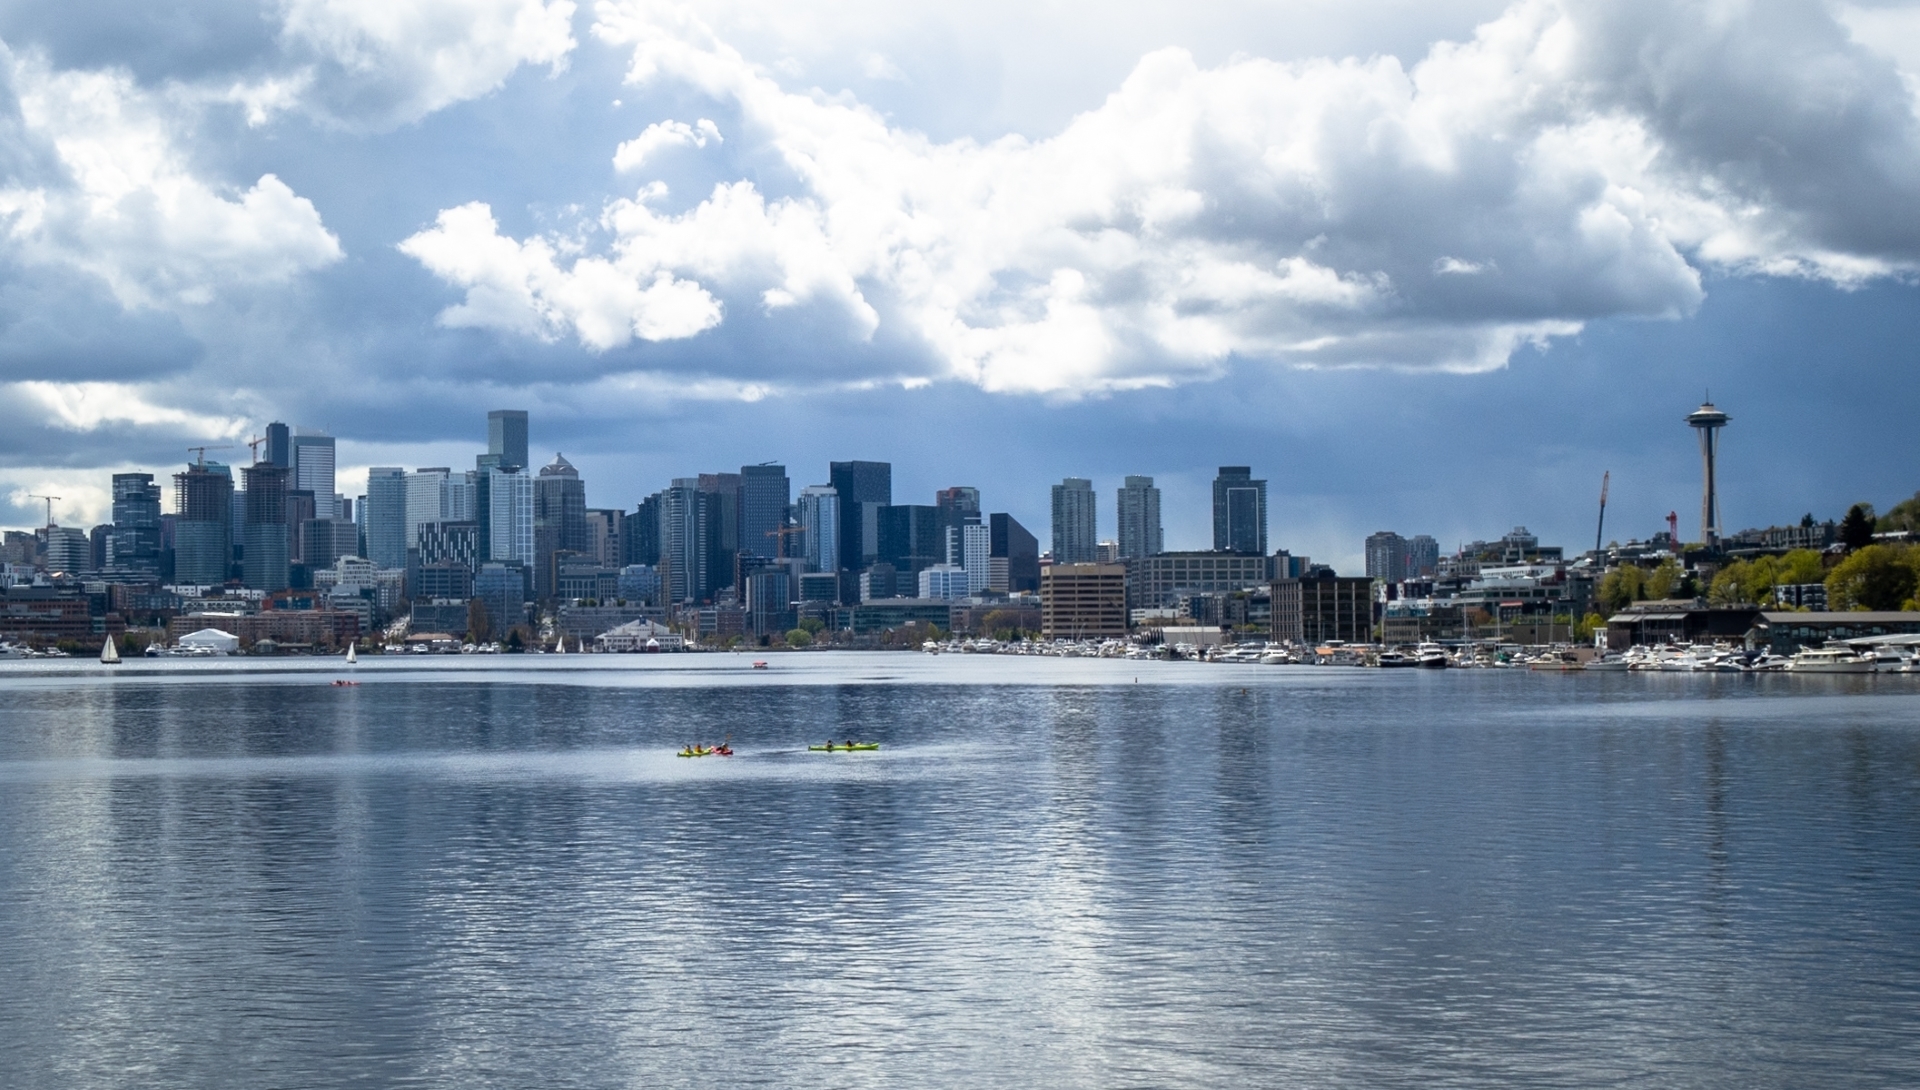 Seattle-Gas-Works-Park-2-of-3-The-park-offers-outstanding-views-of-Lake-Union-and-the-Seattle-skyline-JB-Place-by-Amy-Levine-SR